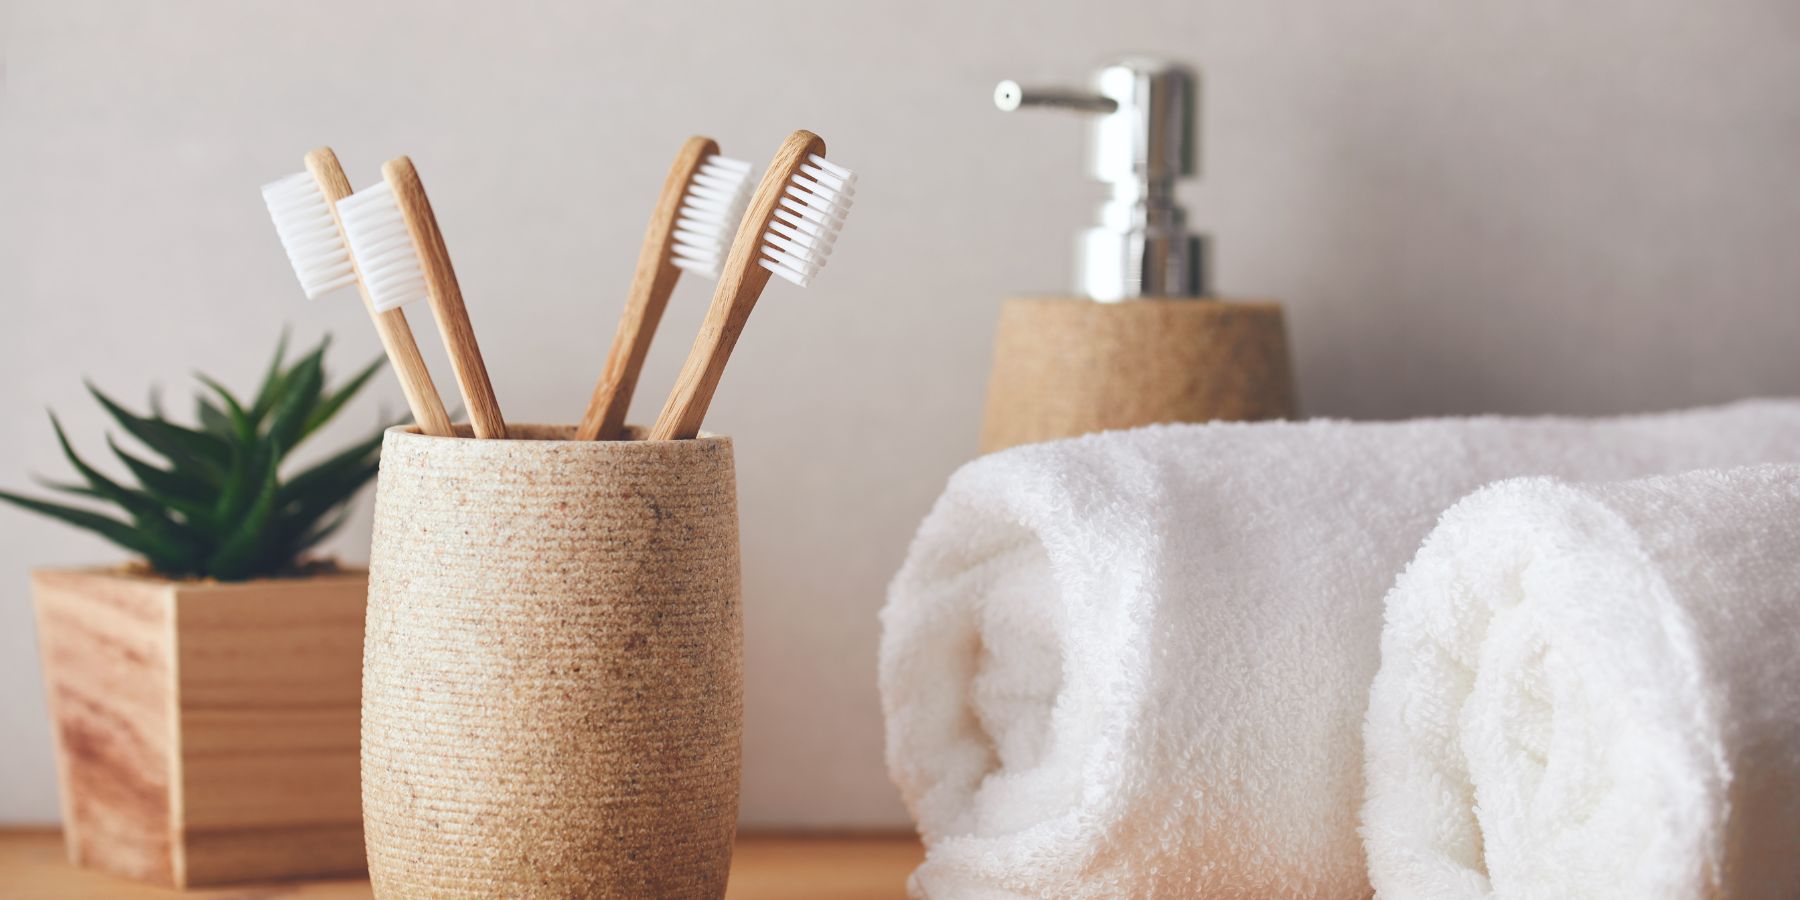 Cold and Flu Season: 5 Tips to Disinfect Your Toothbrush